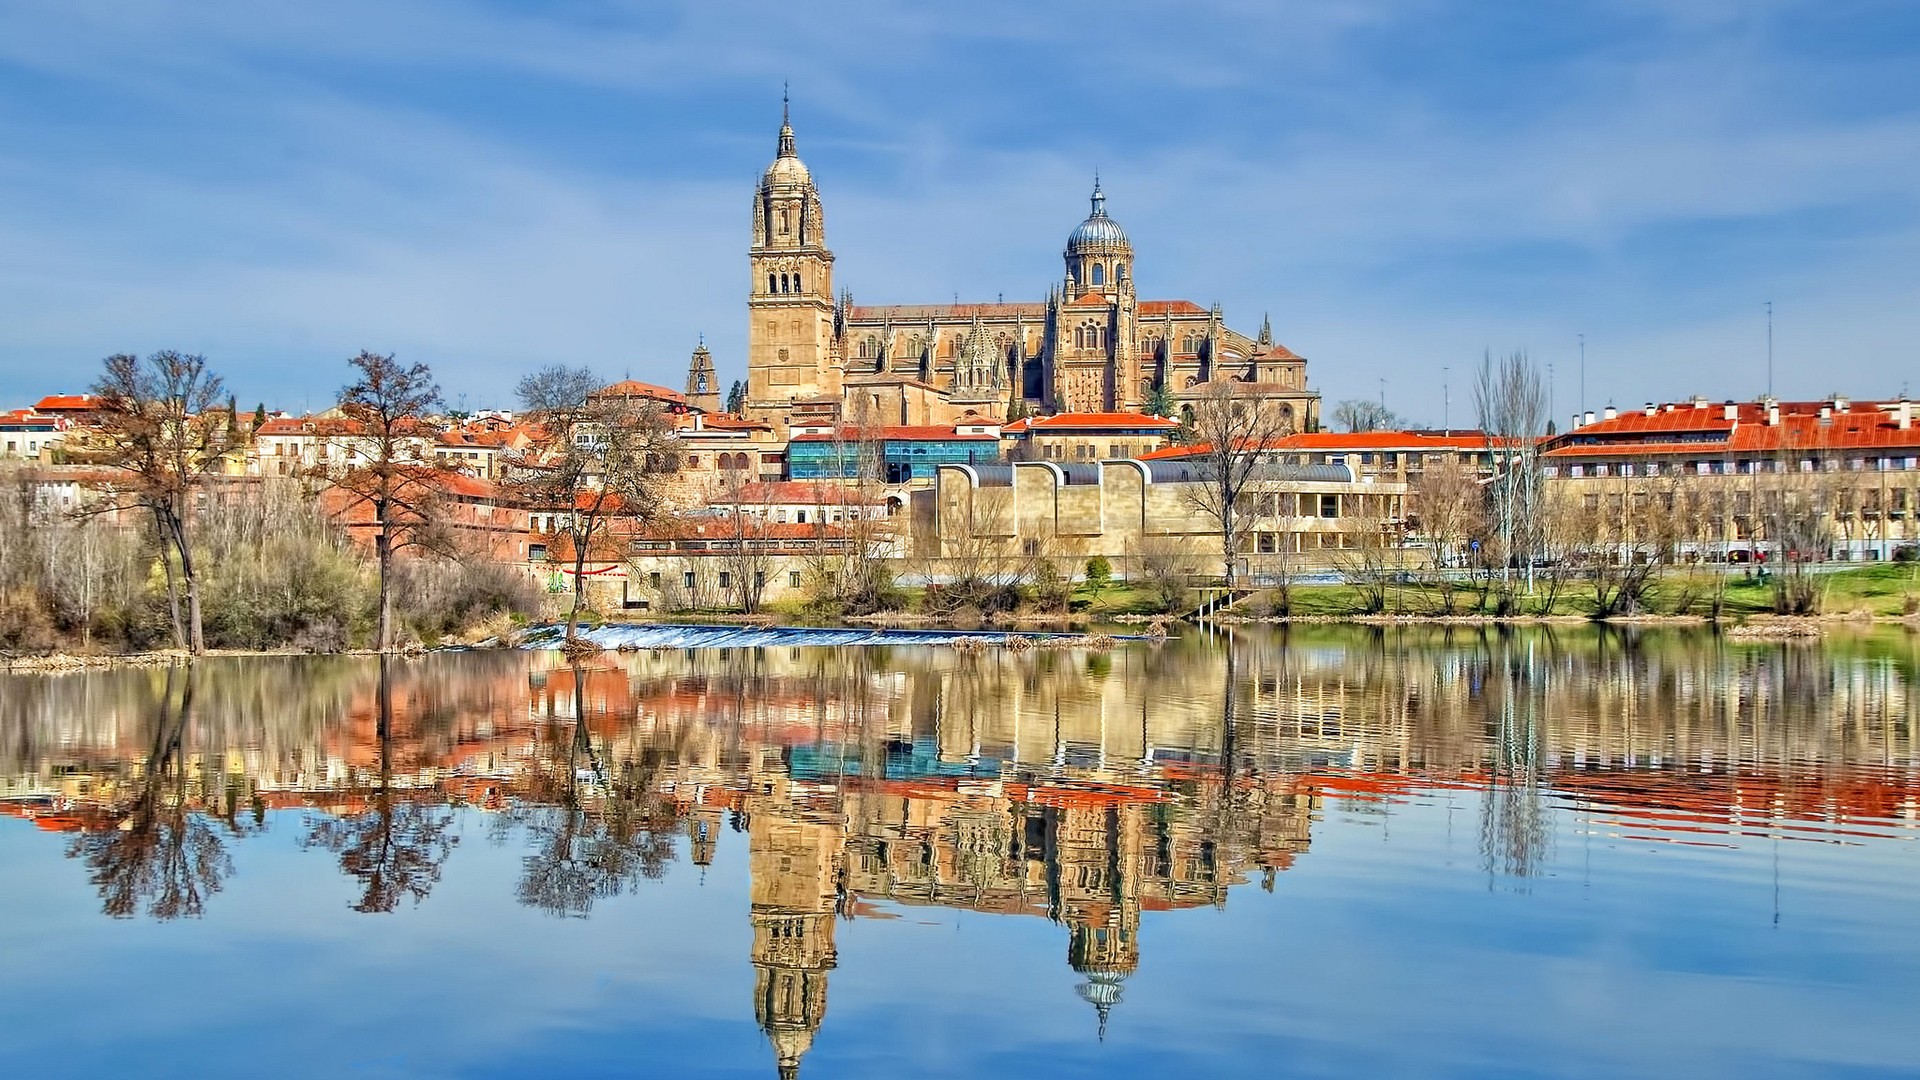 General 1920x1080 architecture building old building town house Spain cathedral water lake reflection trees clouds tower